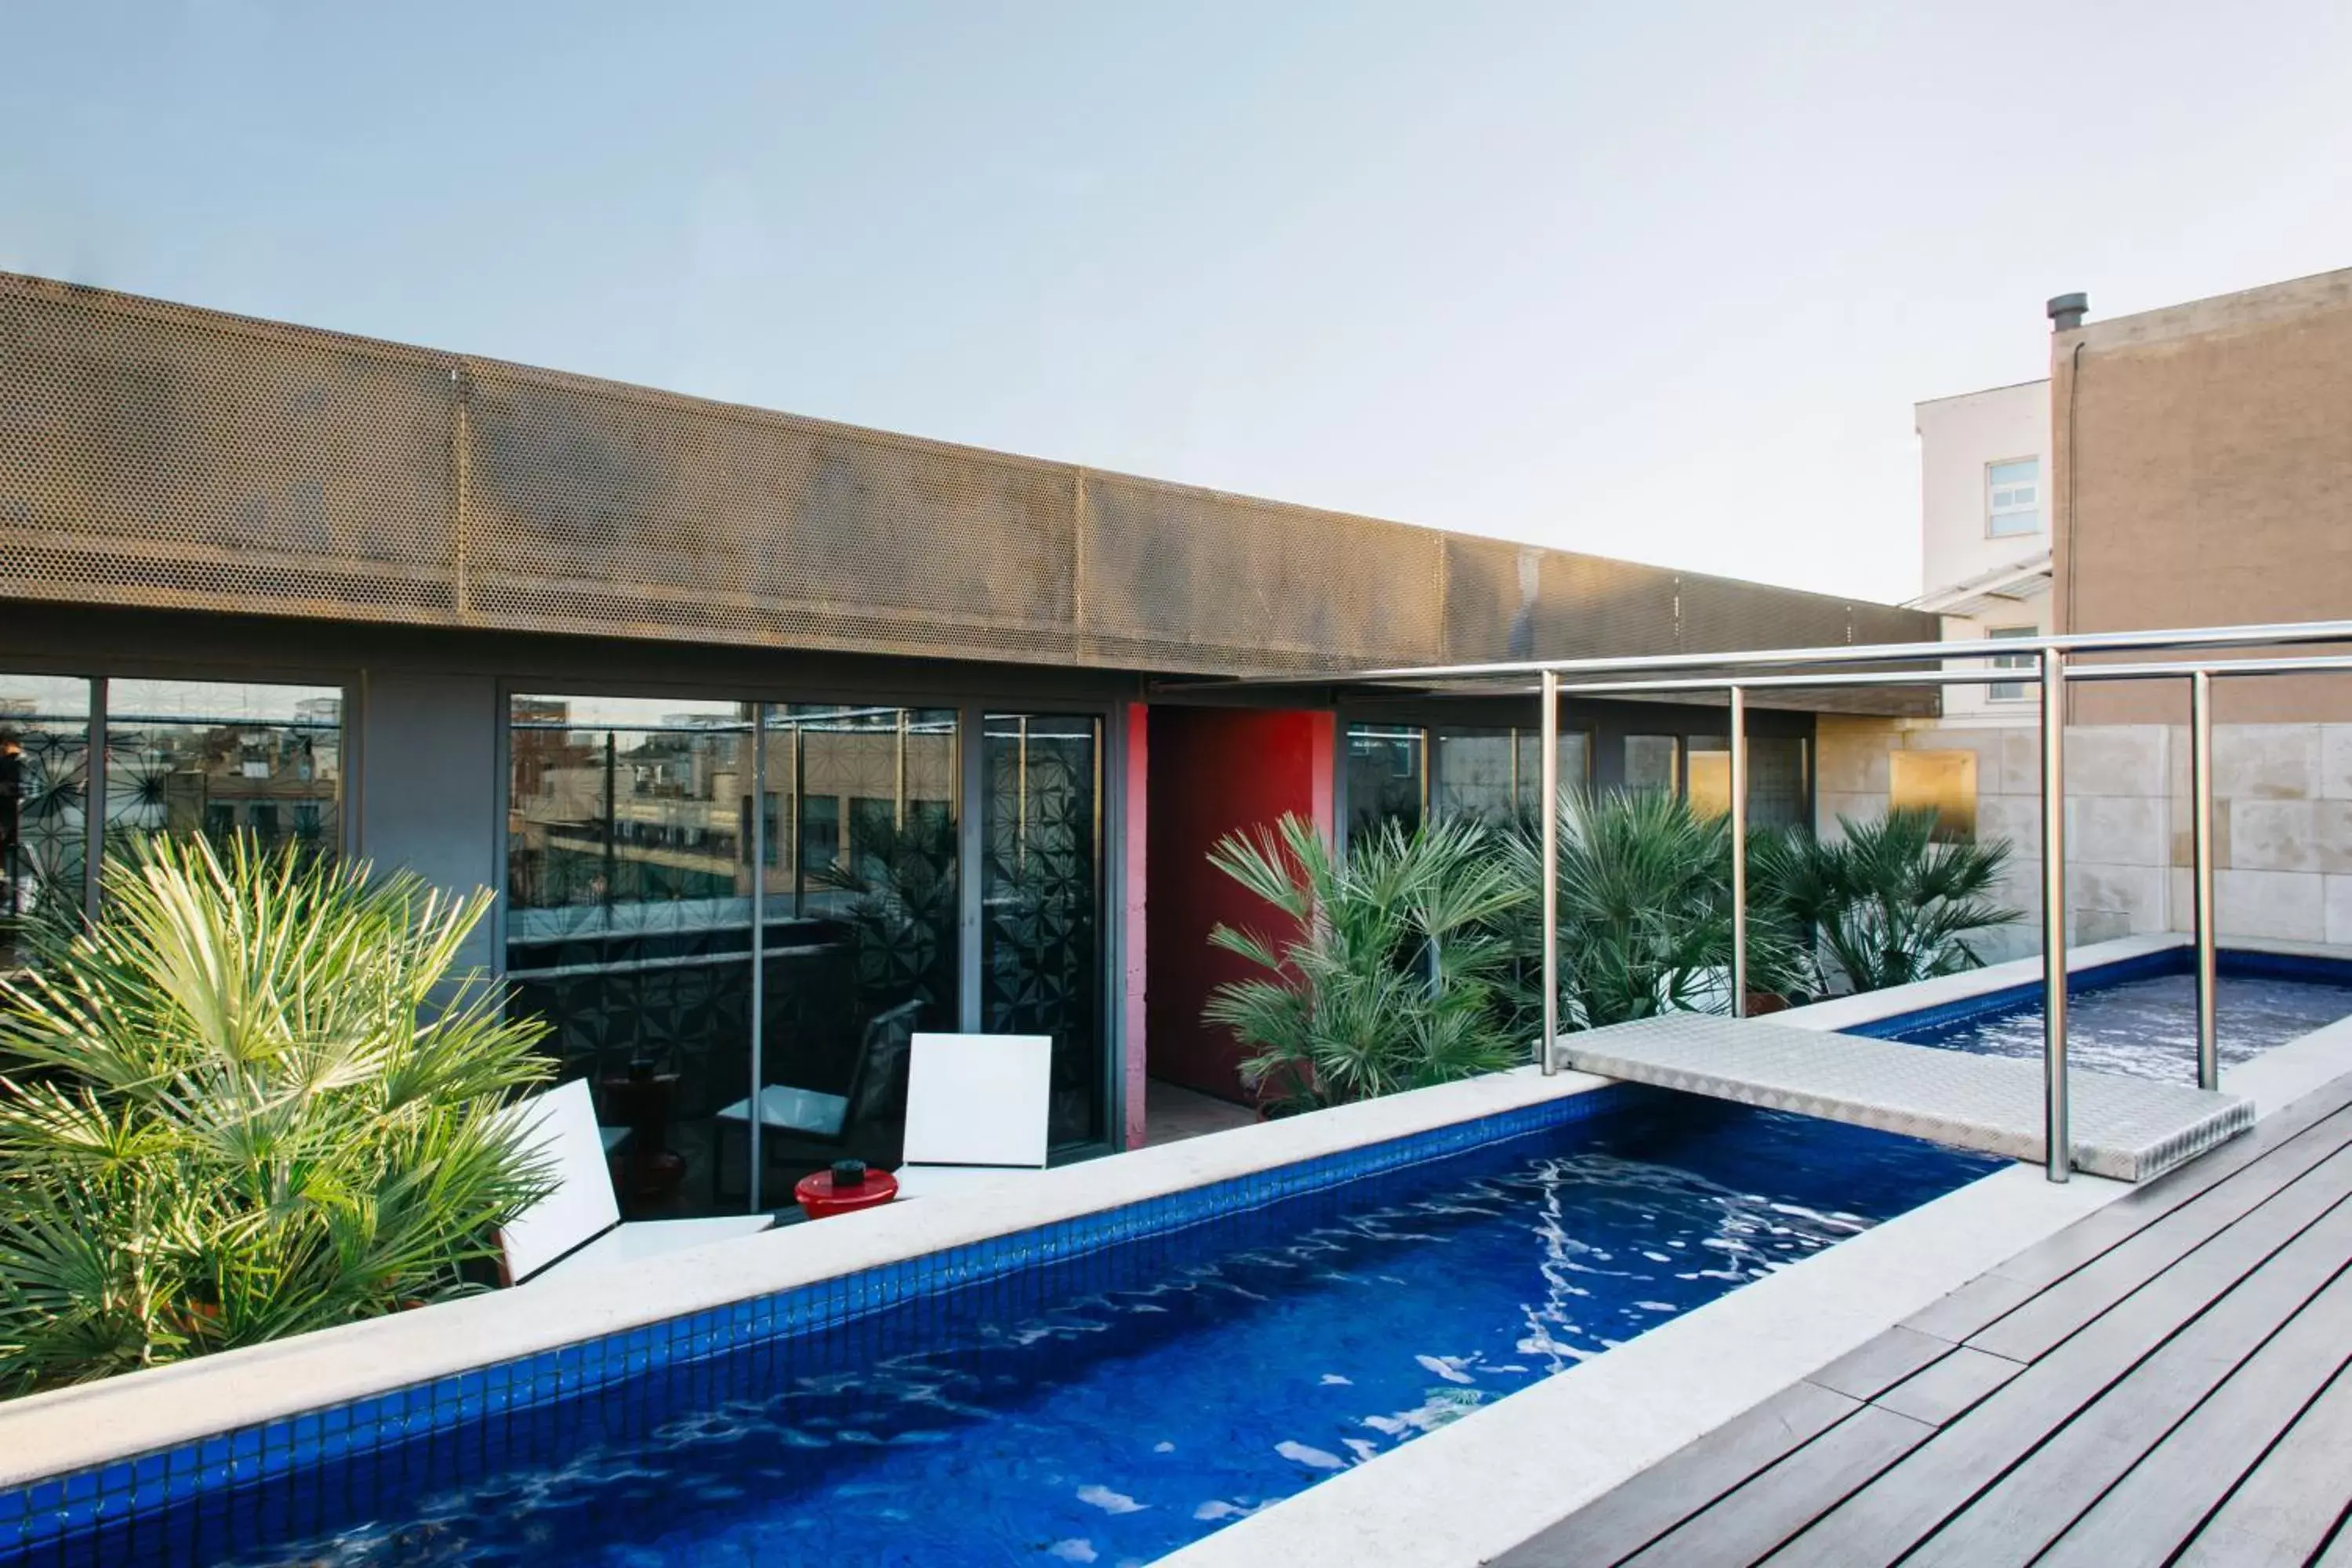 Balcony/Terrace, Swimming Pool in Hotel Granados 83, a Member of Design Hotels